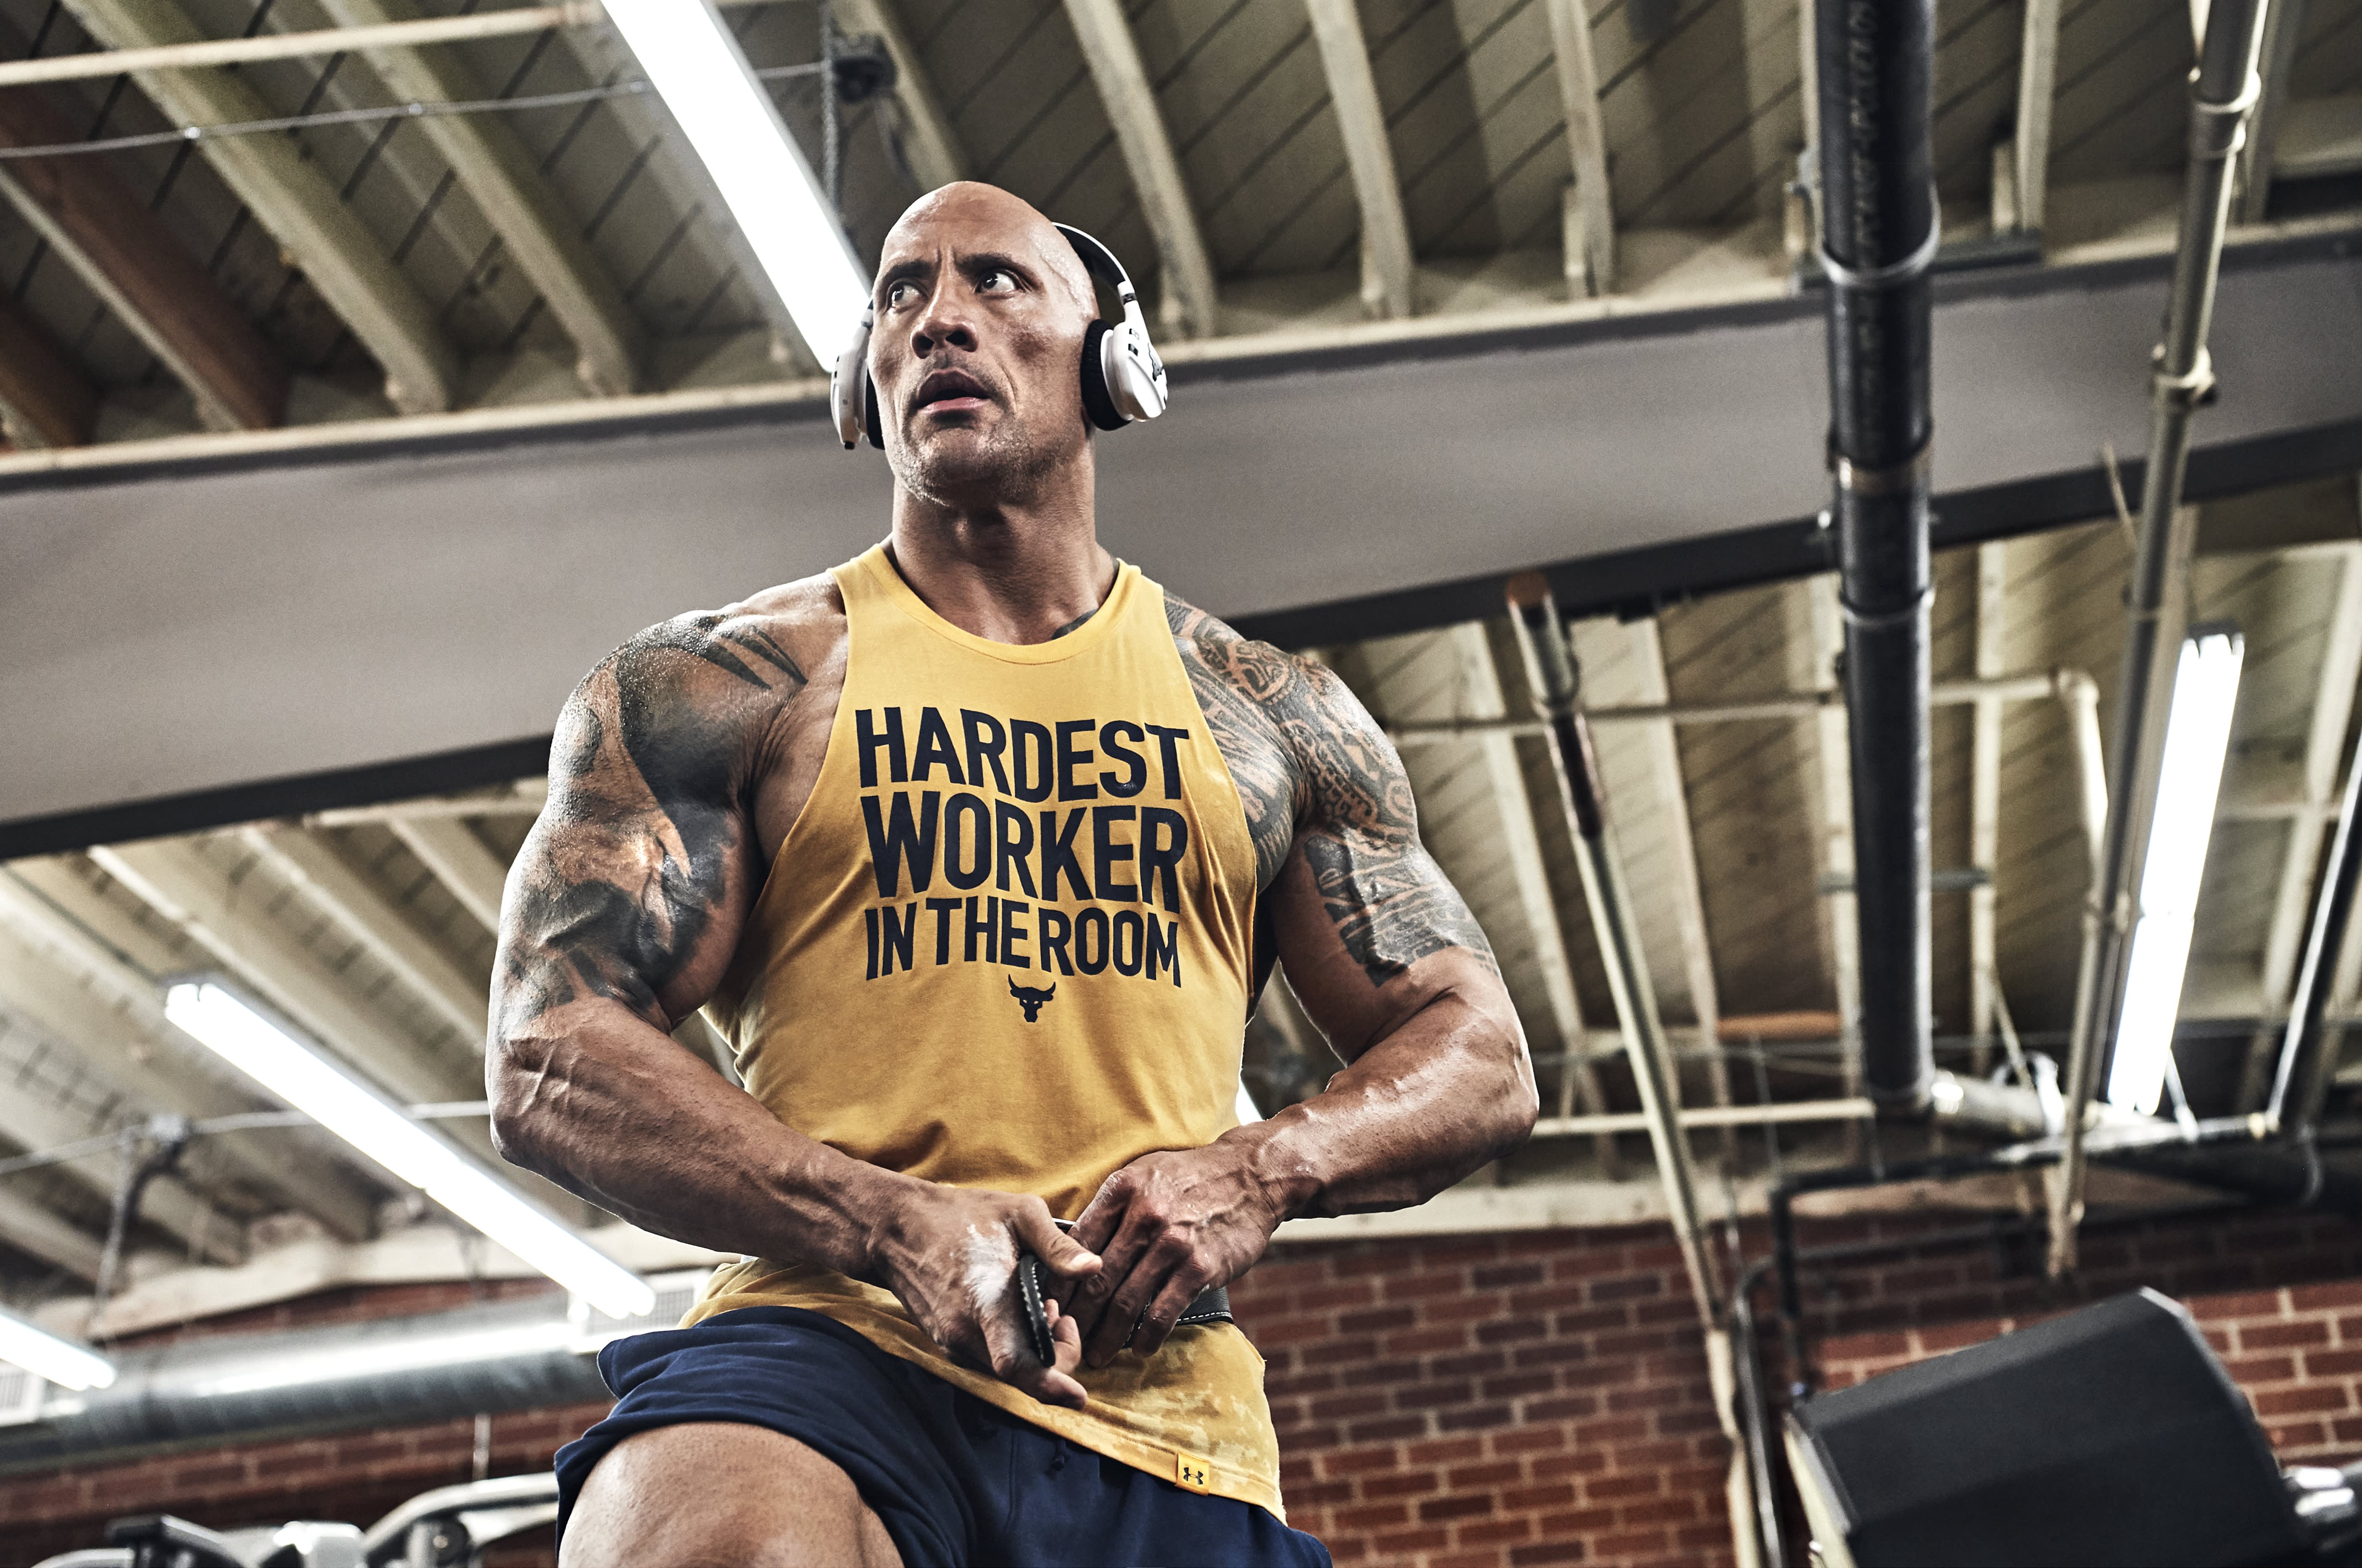 Dwayne Johnson just dropped his latest Project Rock ad campaign